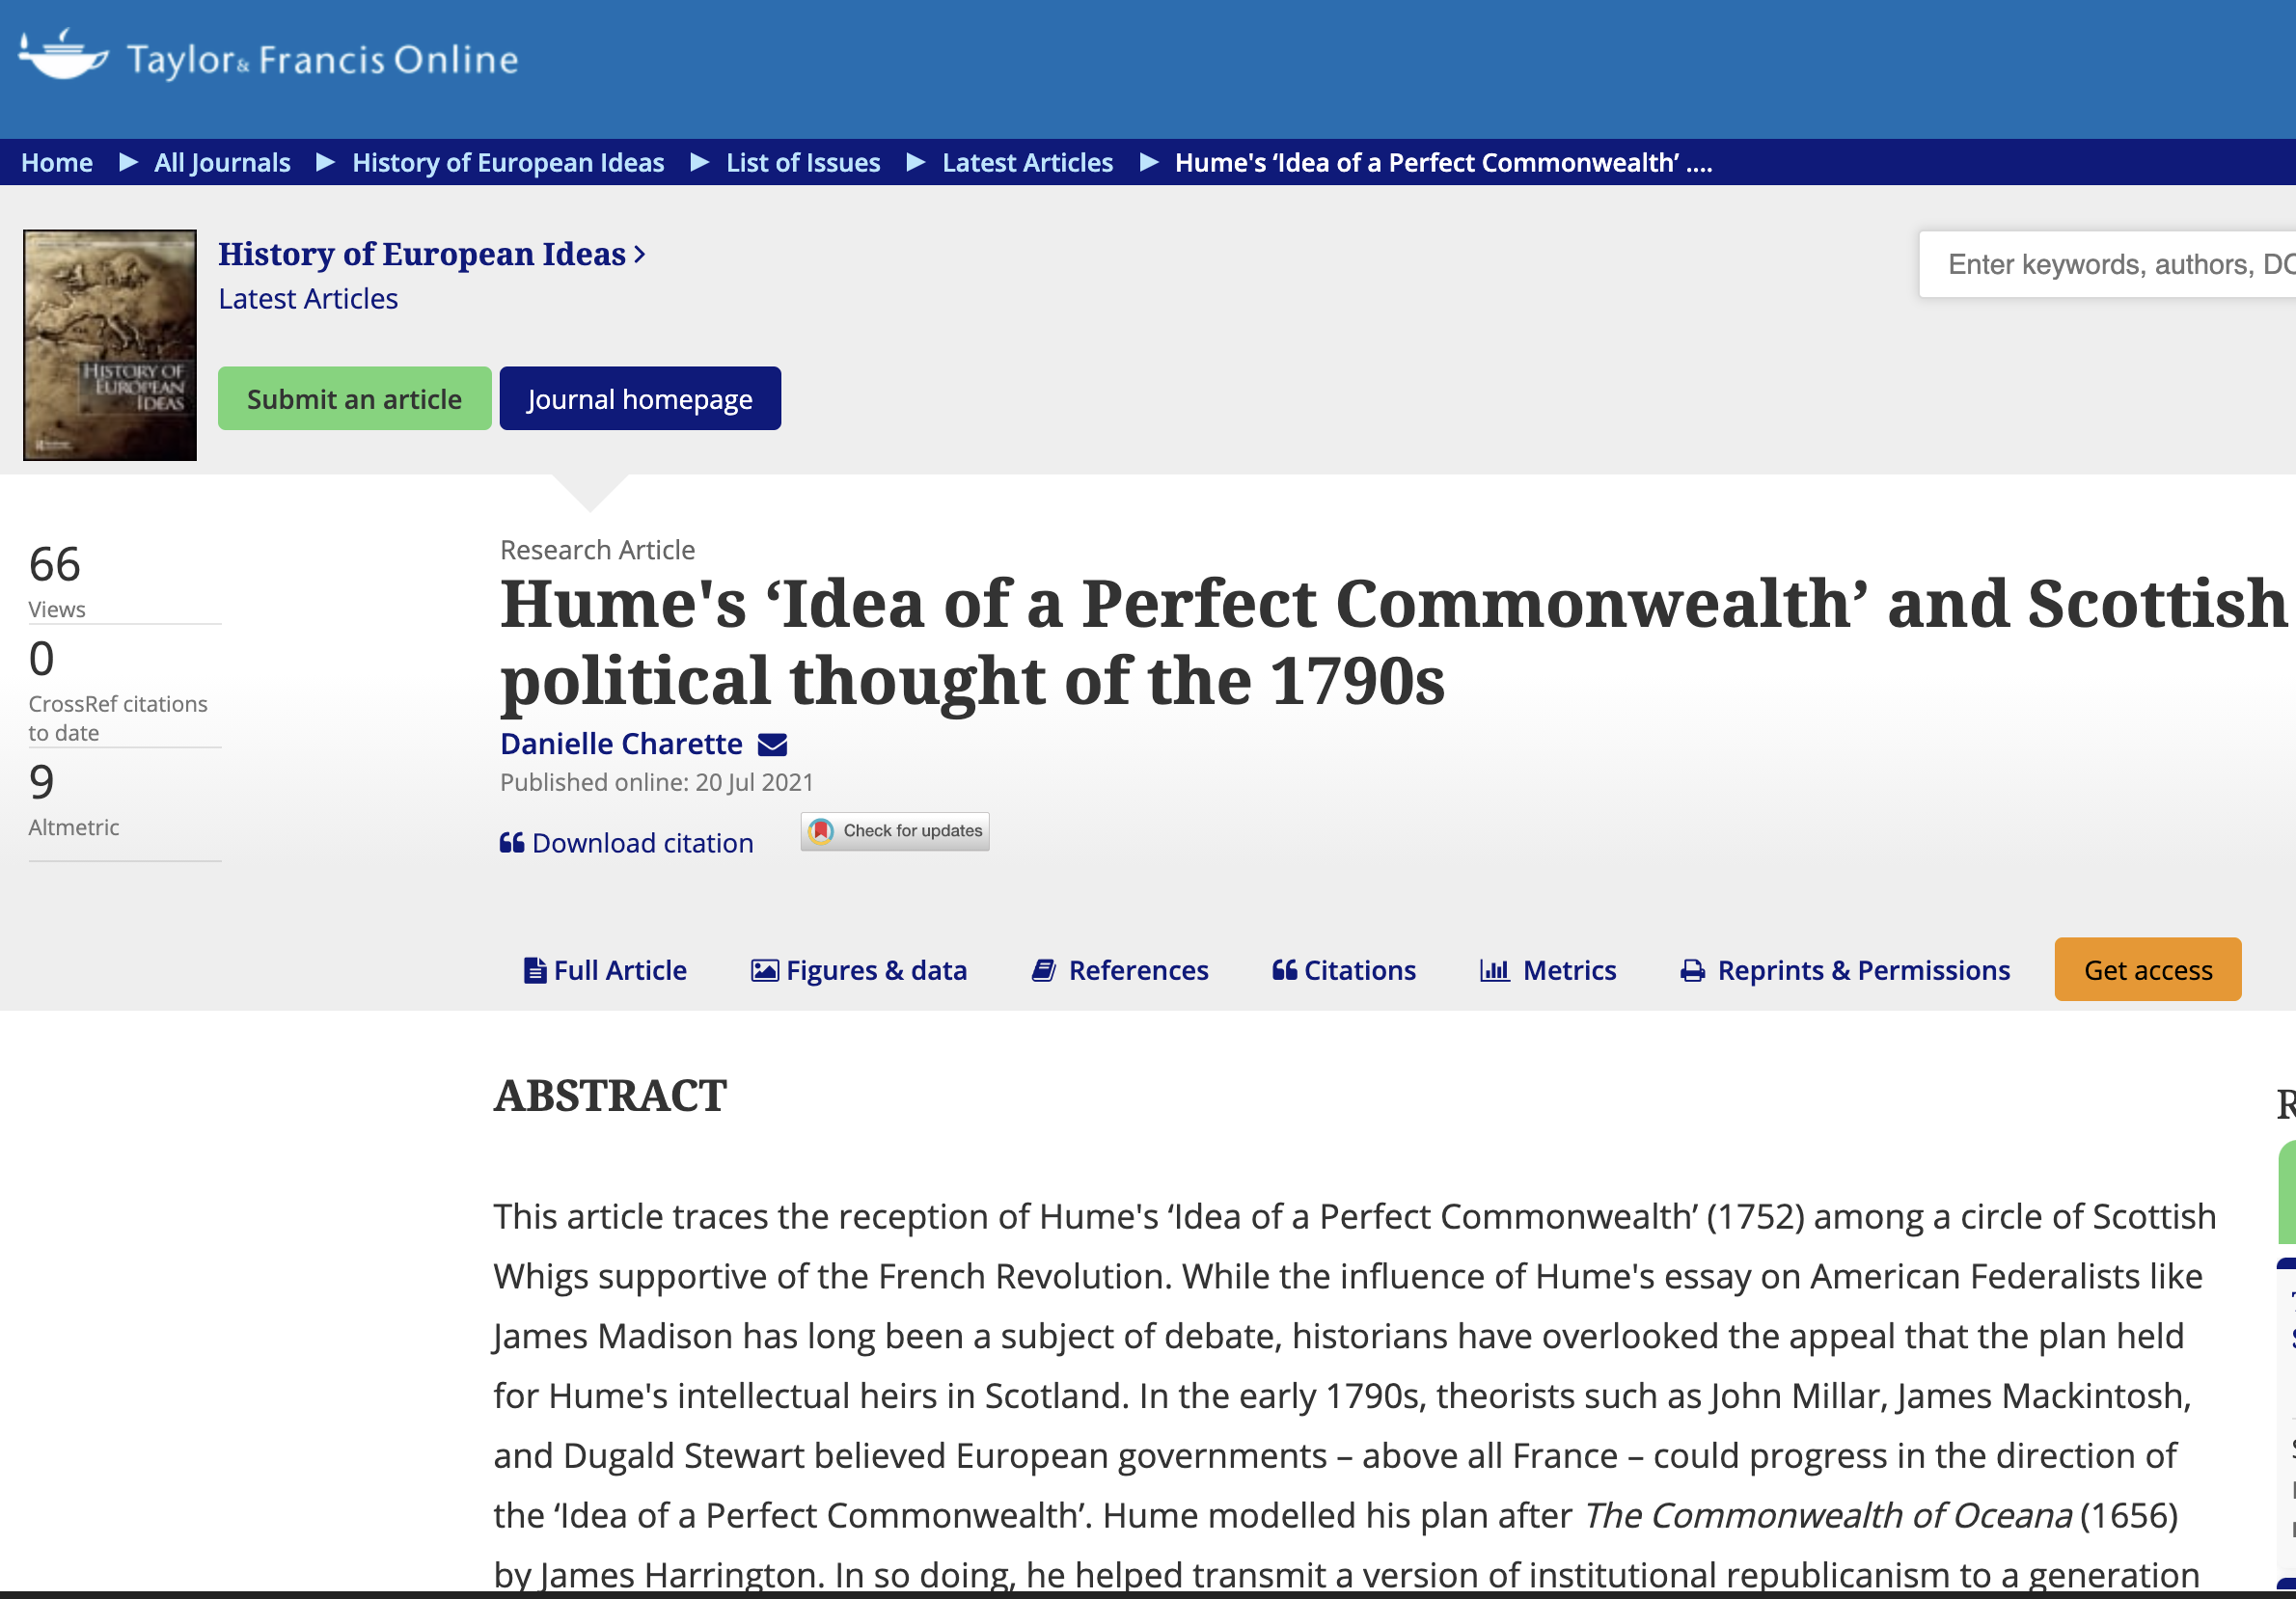 Hume's ‘Idea of a Perfect Commonwealth’ and Scottish political thought of the 1790s